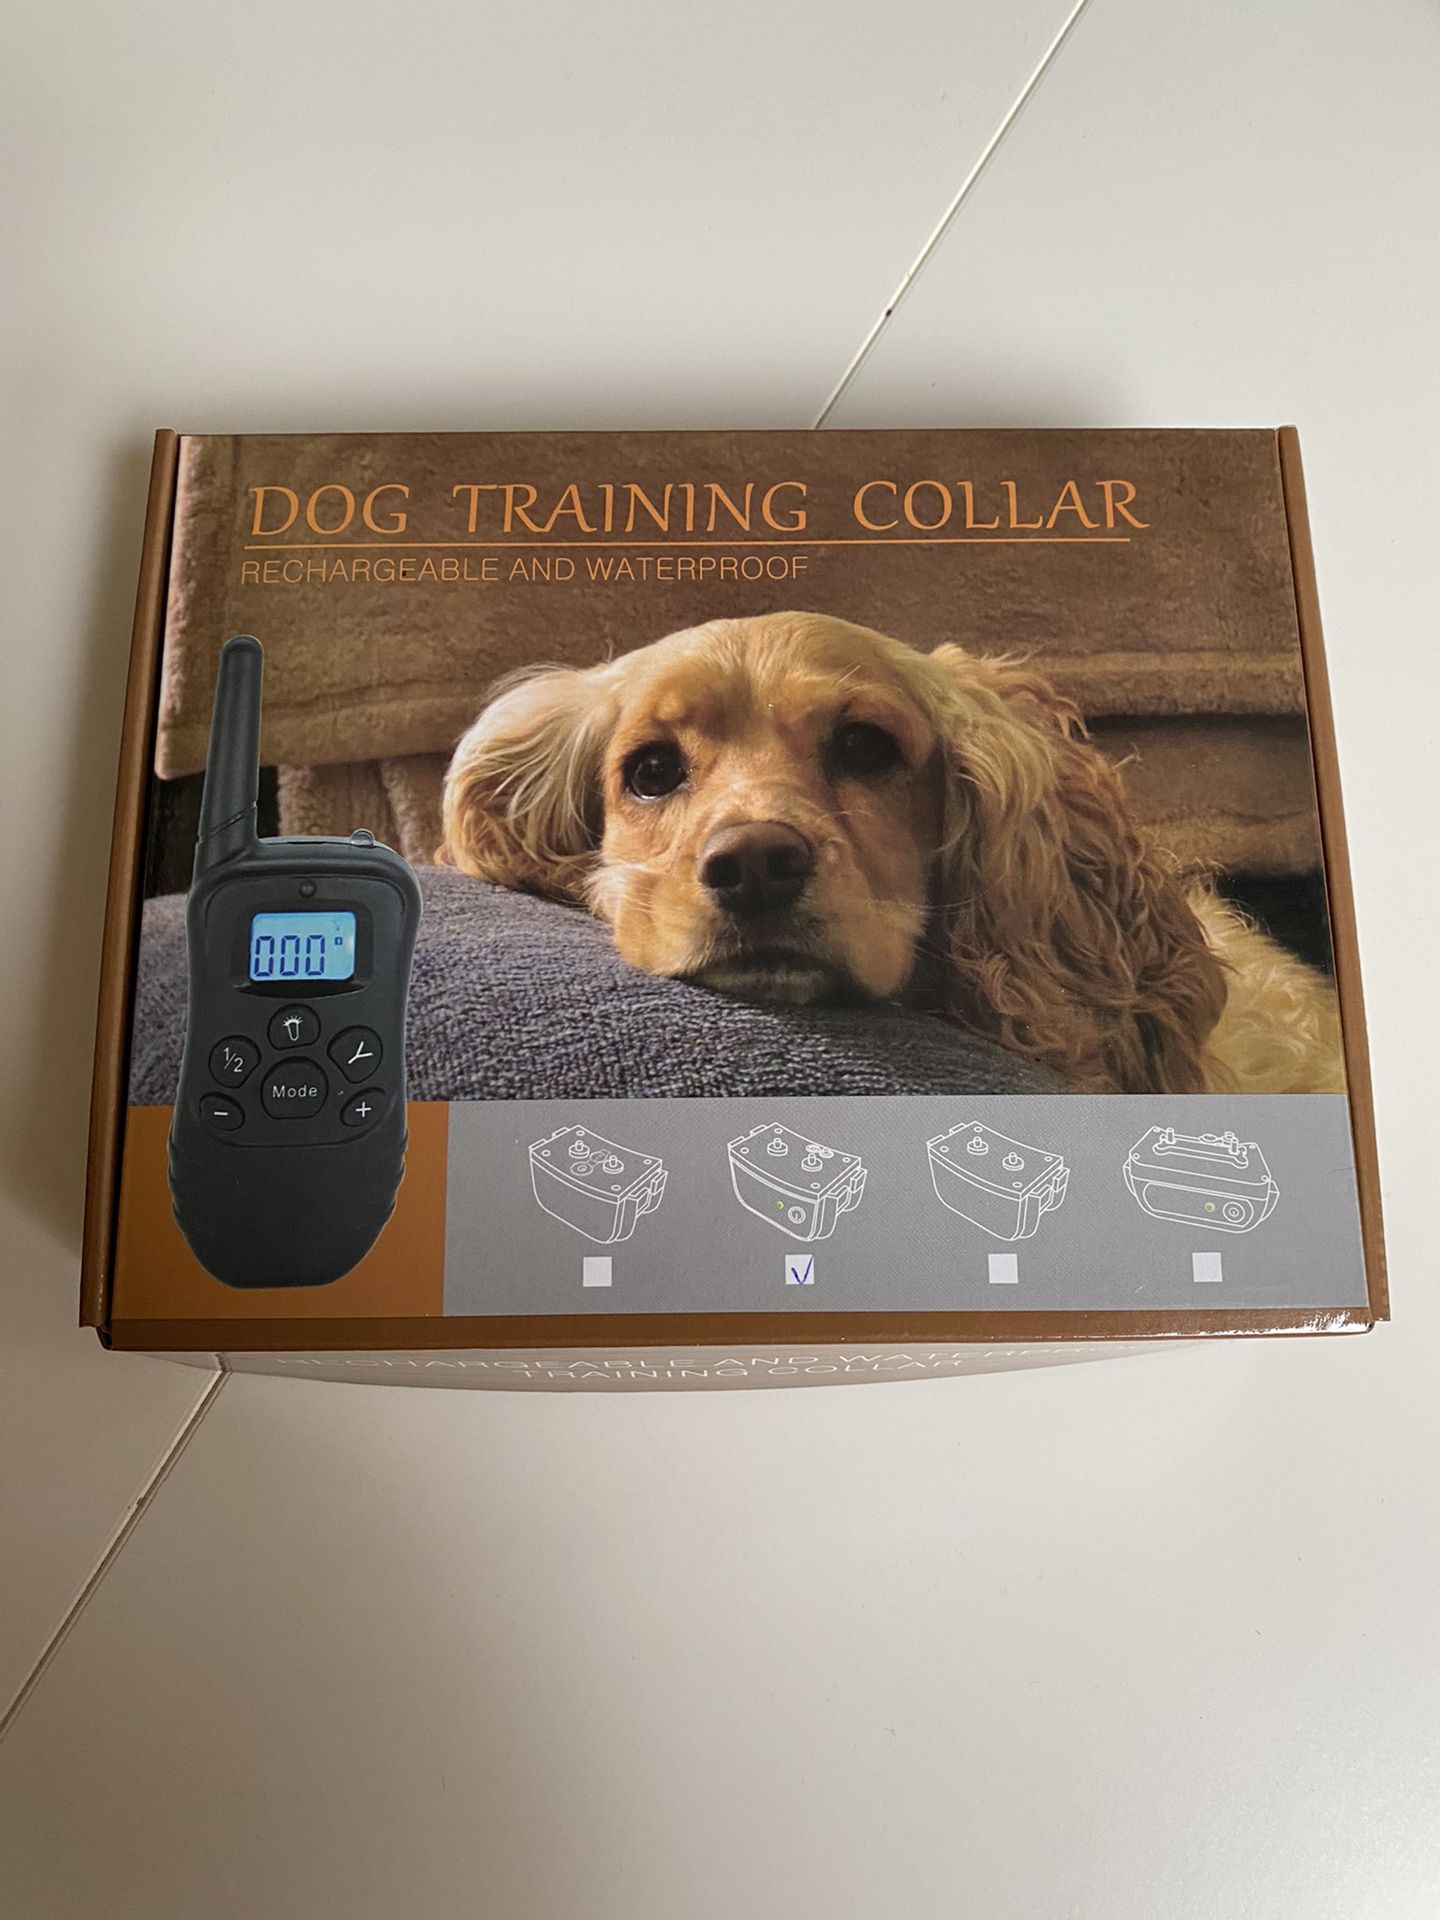 Dog Training Collar, rechargeable and waterproof